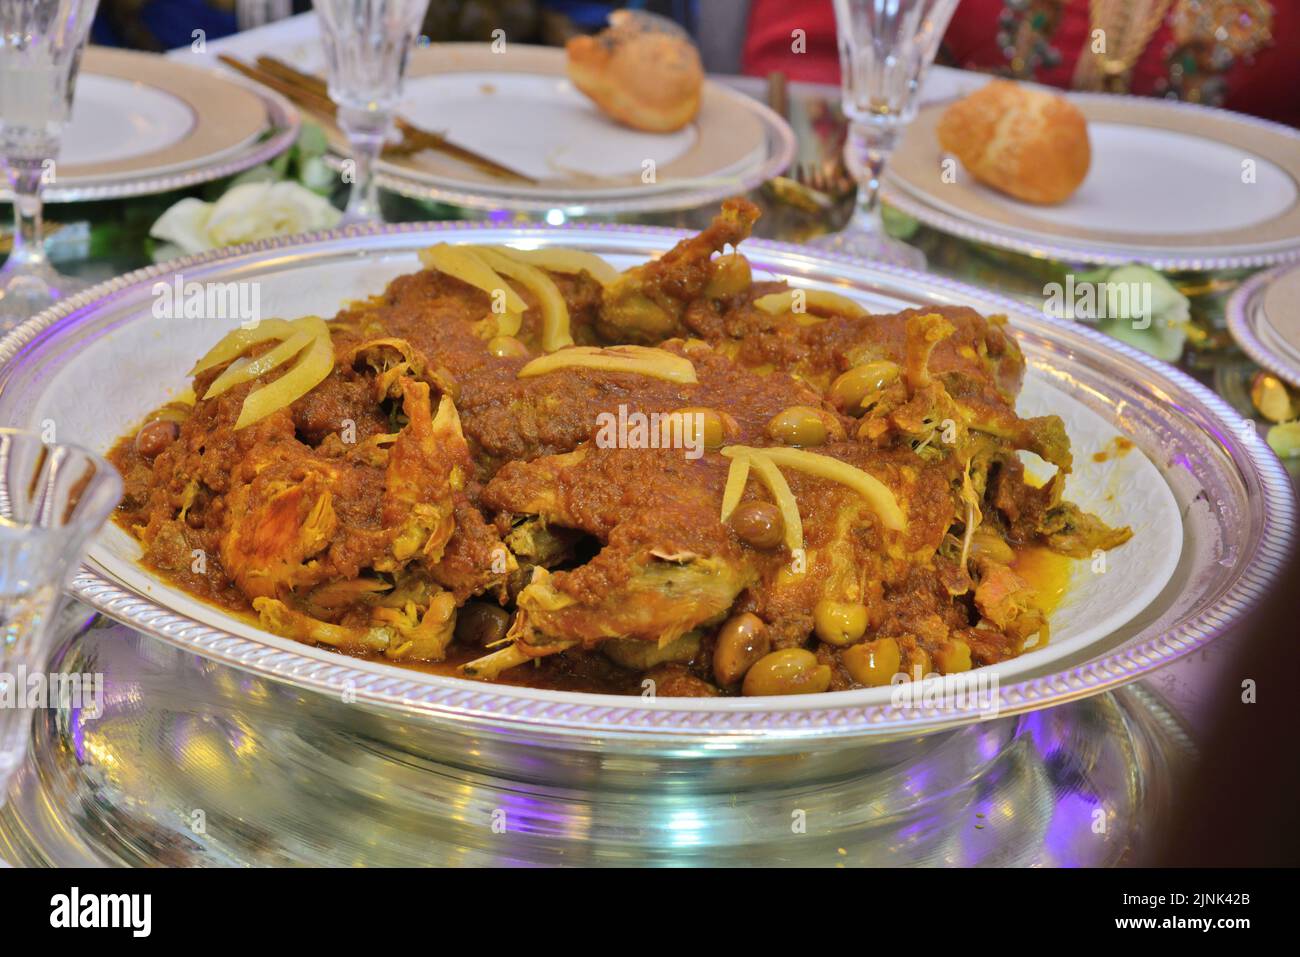 Moroccan-style chicken with olives and lemon. Served as a main dish at weddings Stock Photo